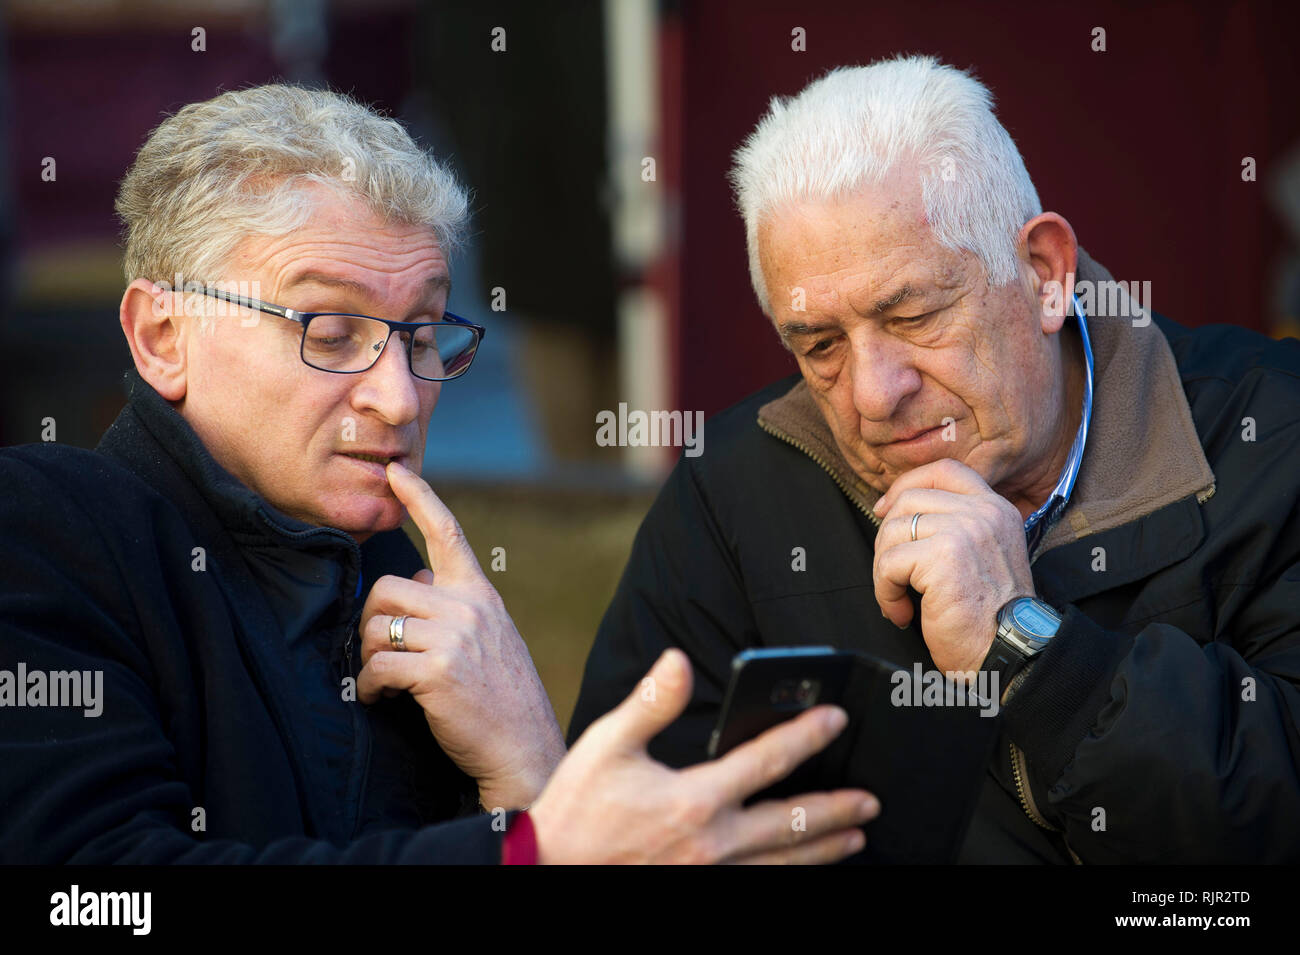 Italy, Lombardy, Monza, the elderly on the bench study how a mobile phone works Stock Photo